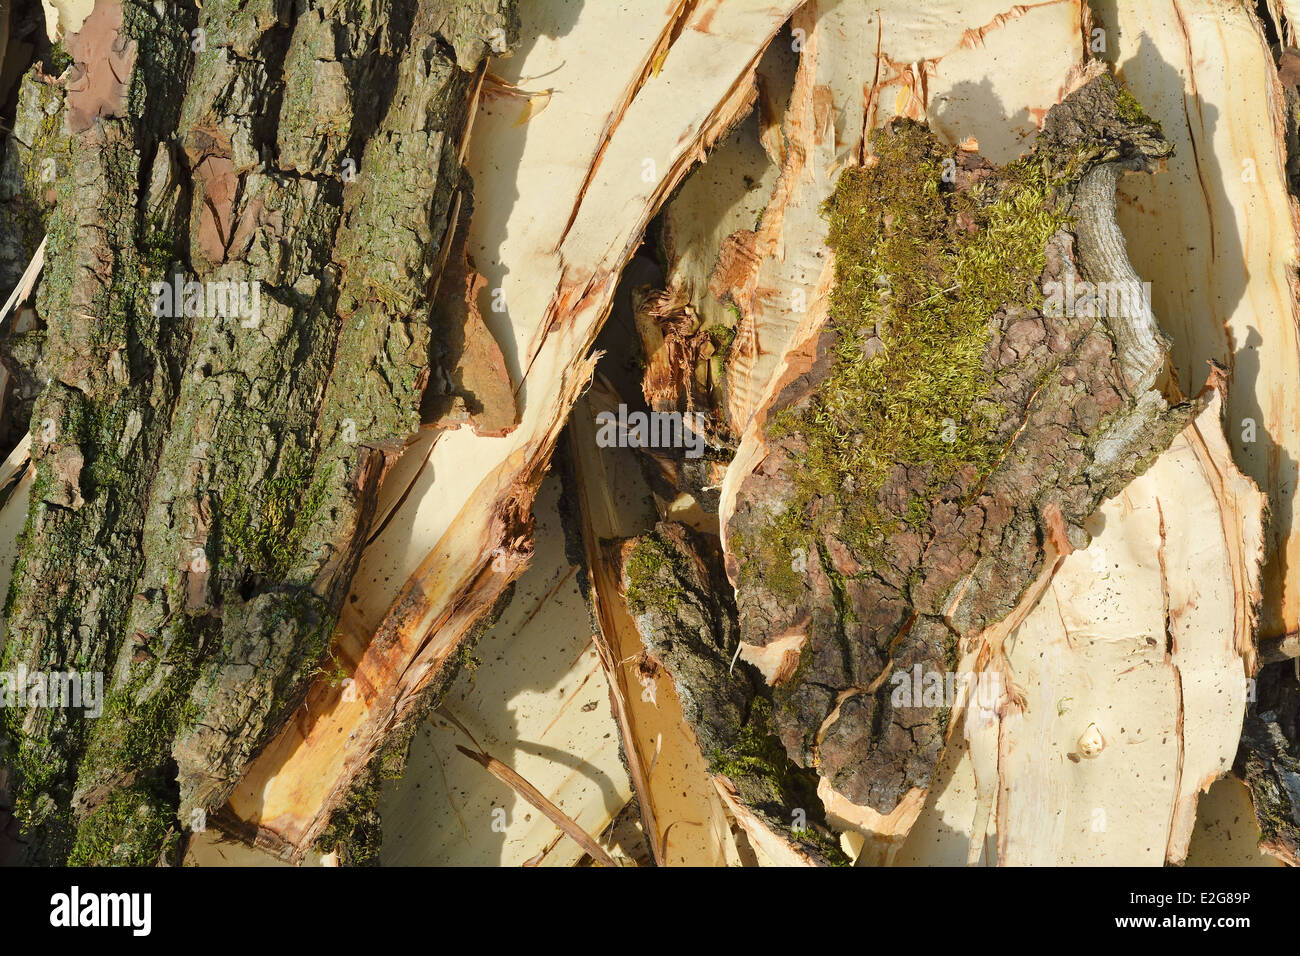 Cut Wood as Renewable Resource of Energy with Textured Bark Composition Stock Photo